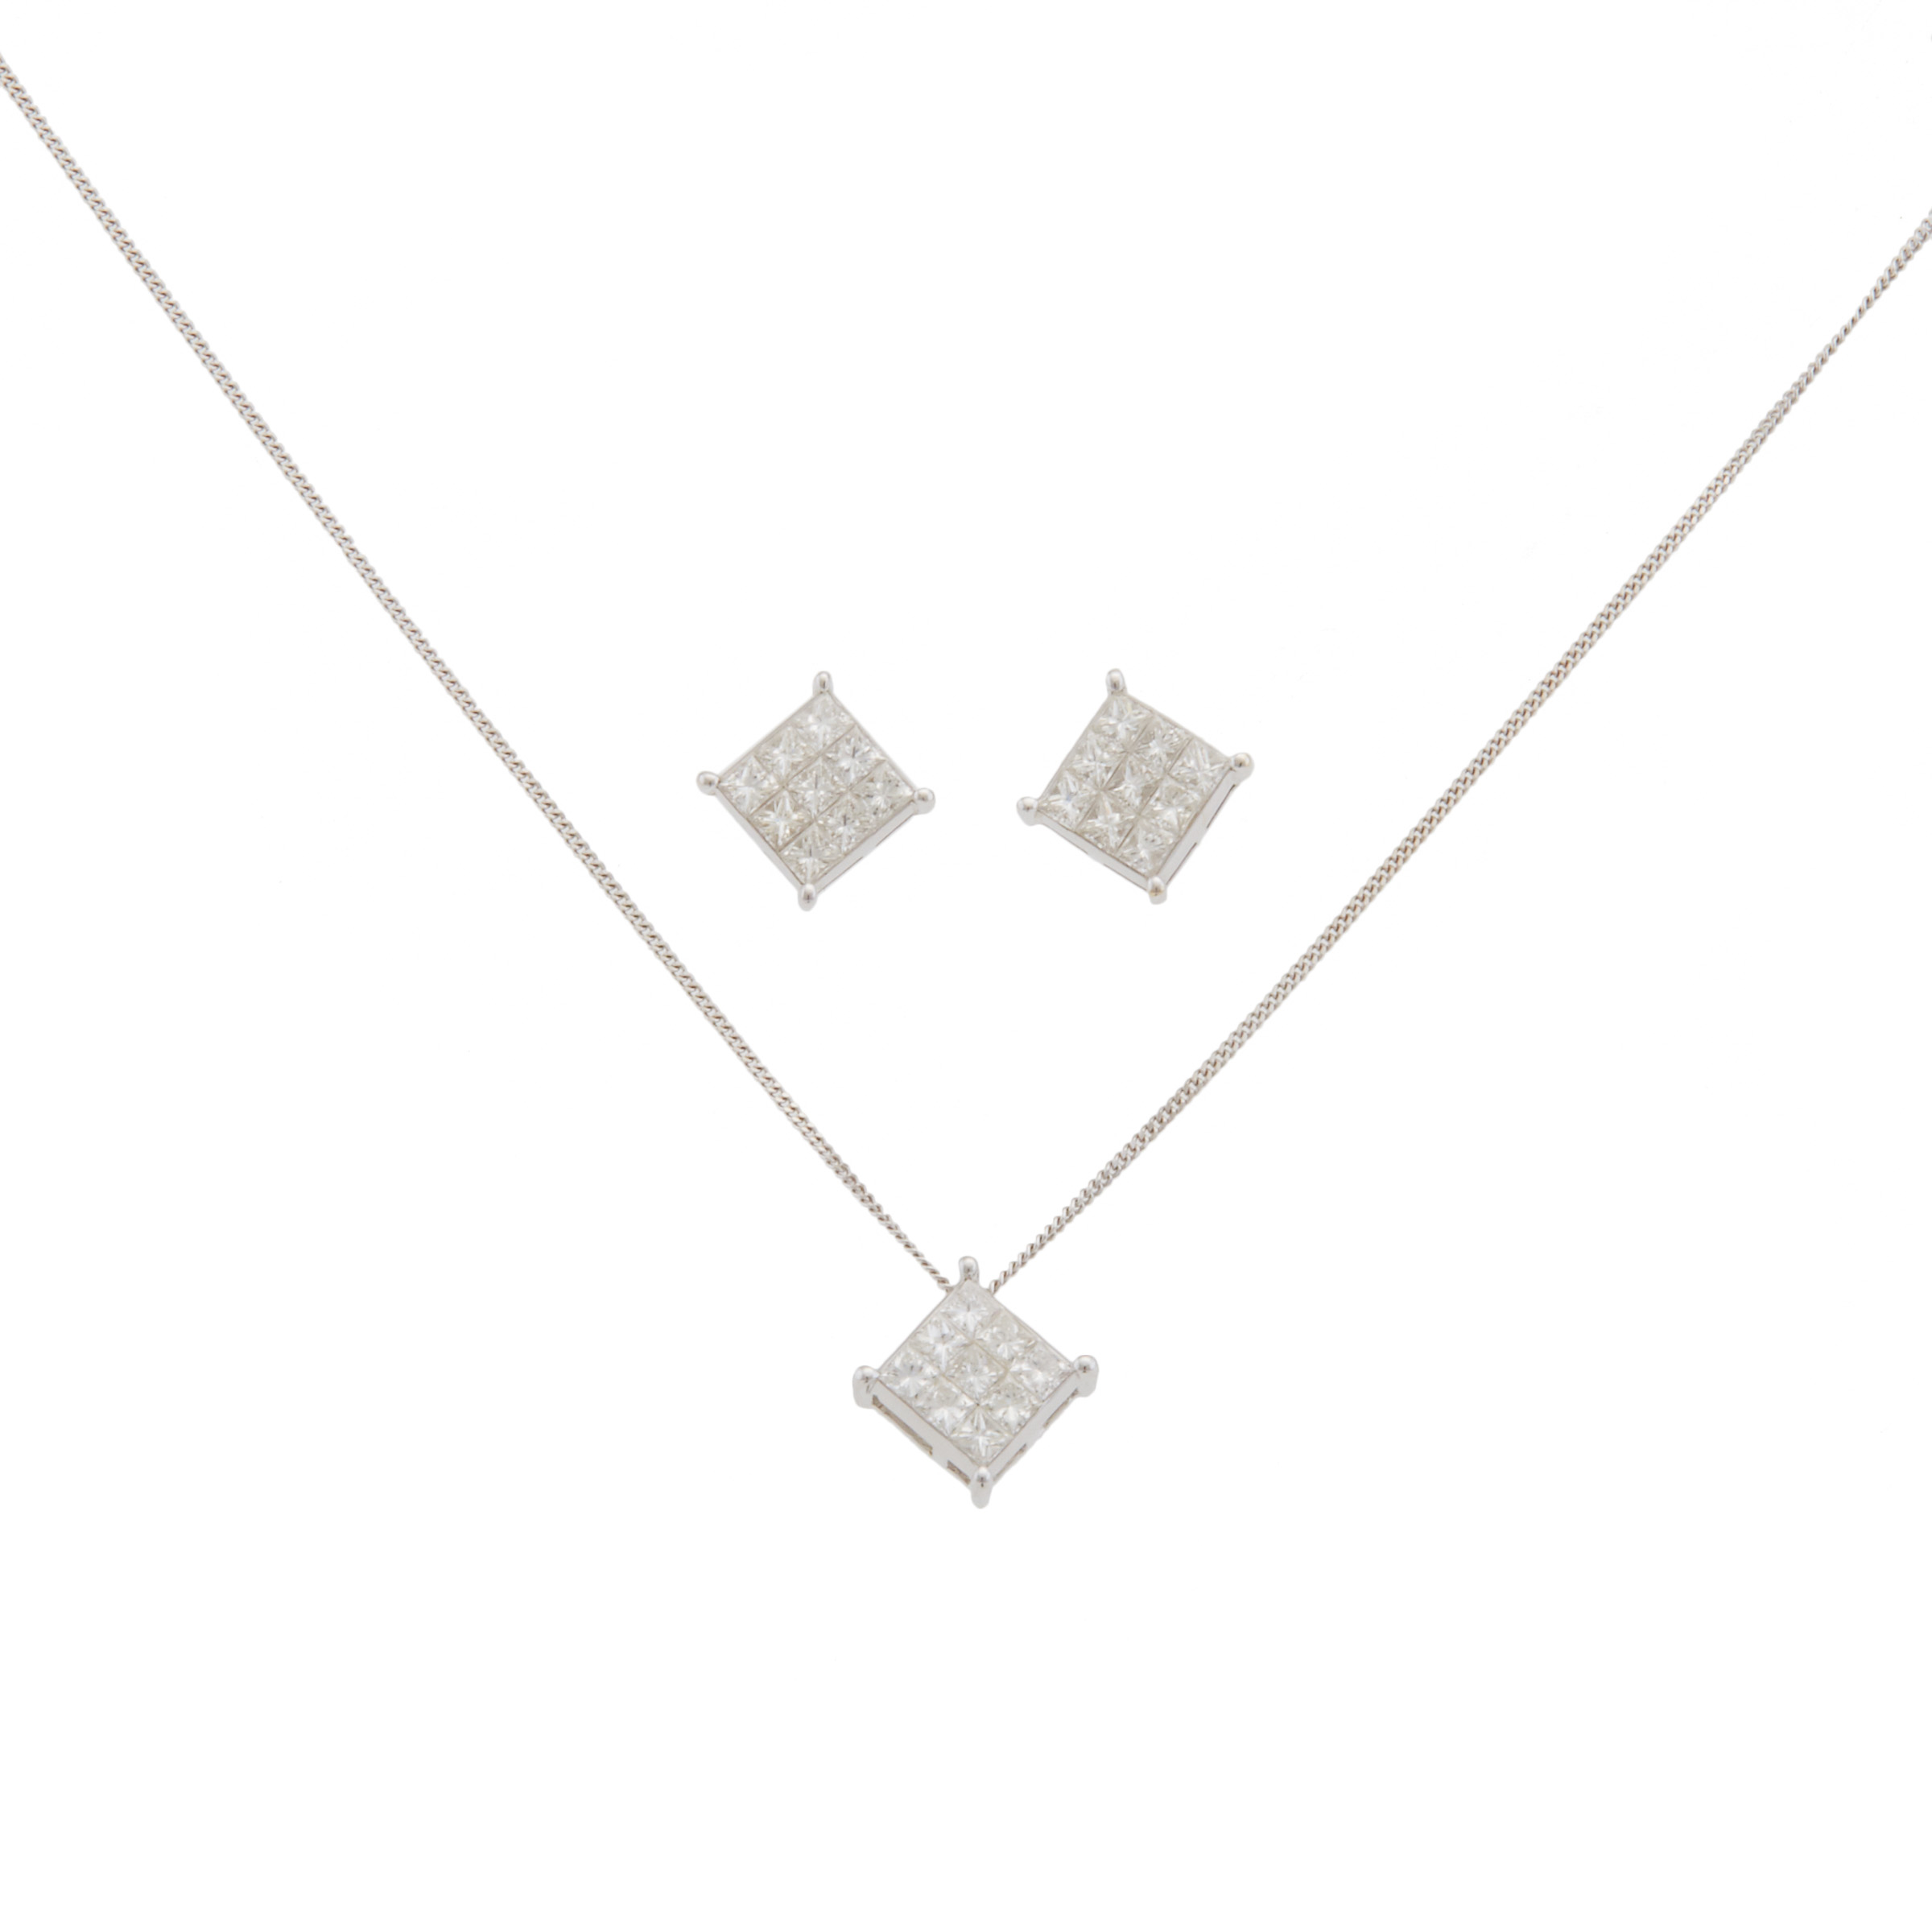 Pair Of 18k White Gold Stud Earrings And Matching Pendant